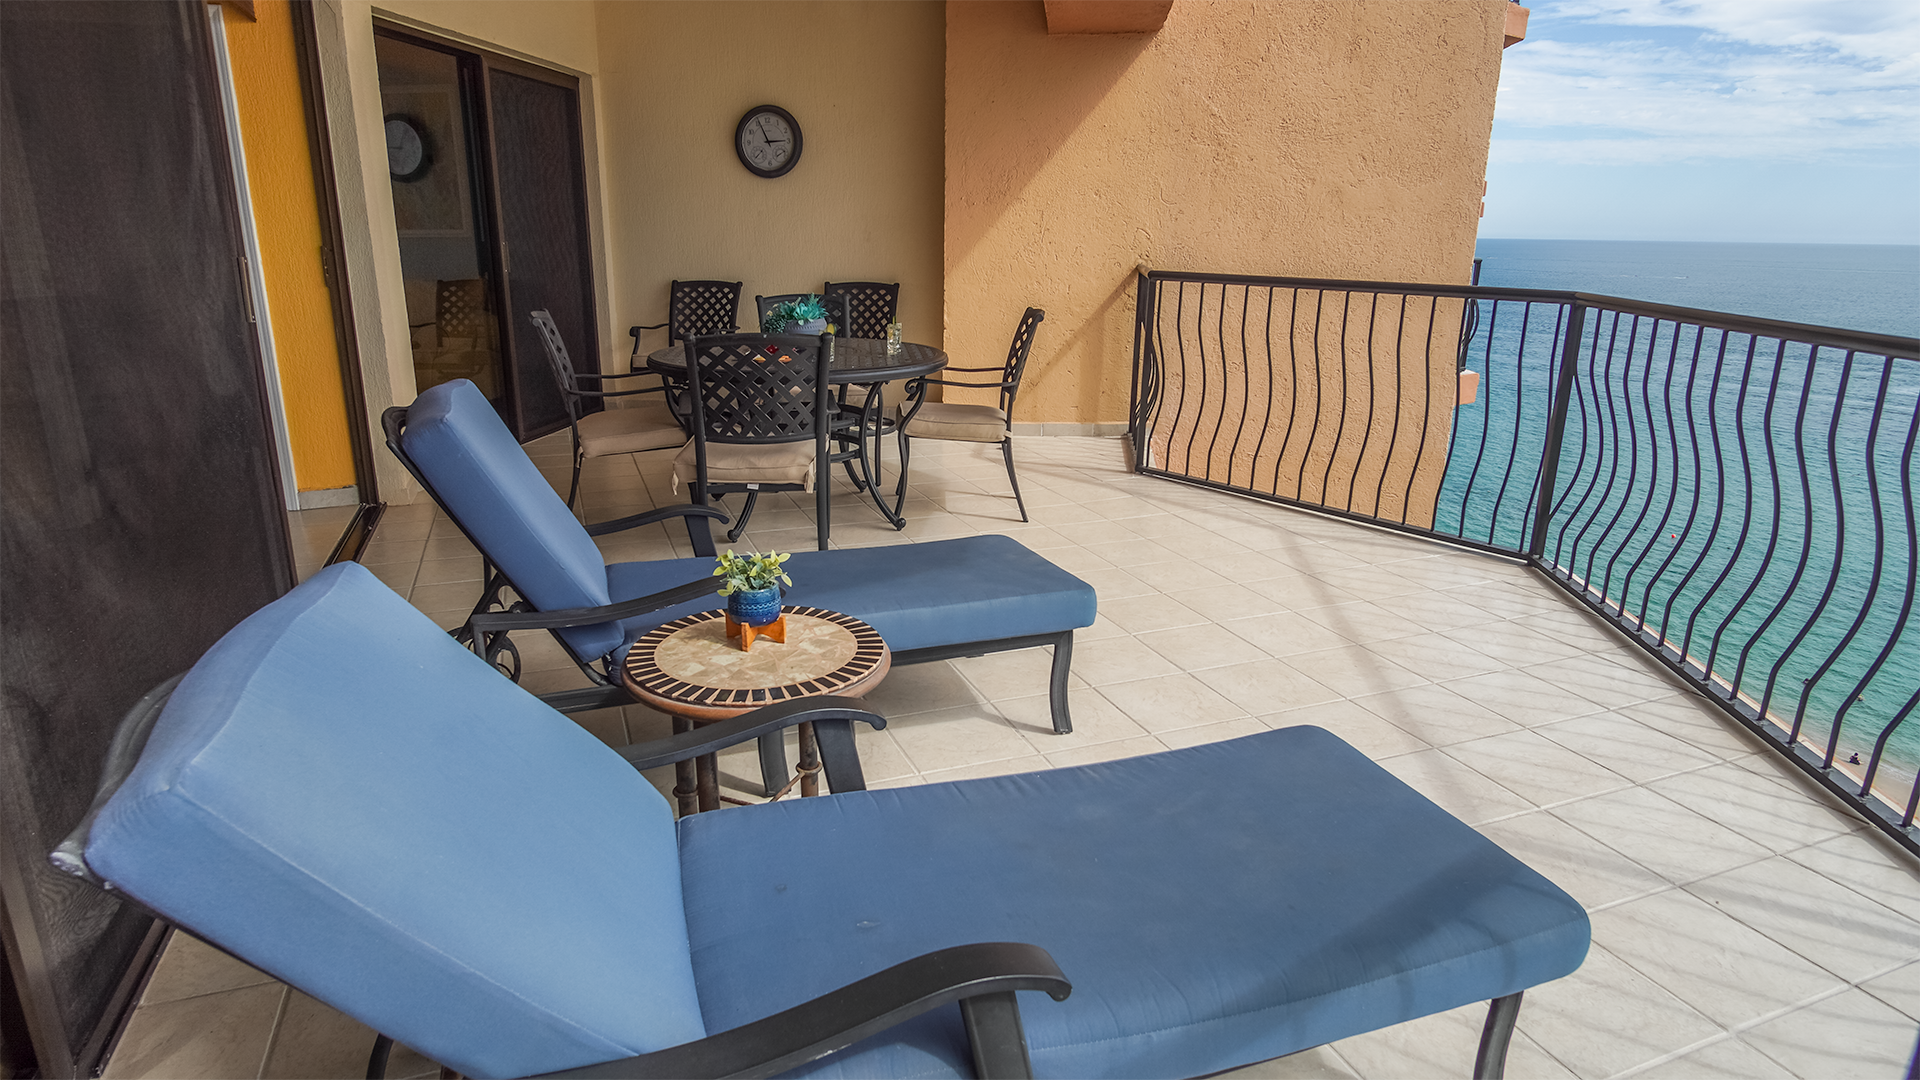 Two chaise lounge chairs, and a dining table on the patio.